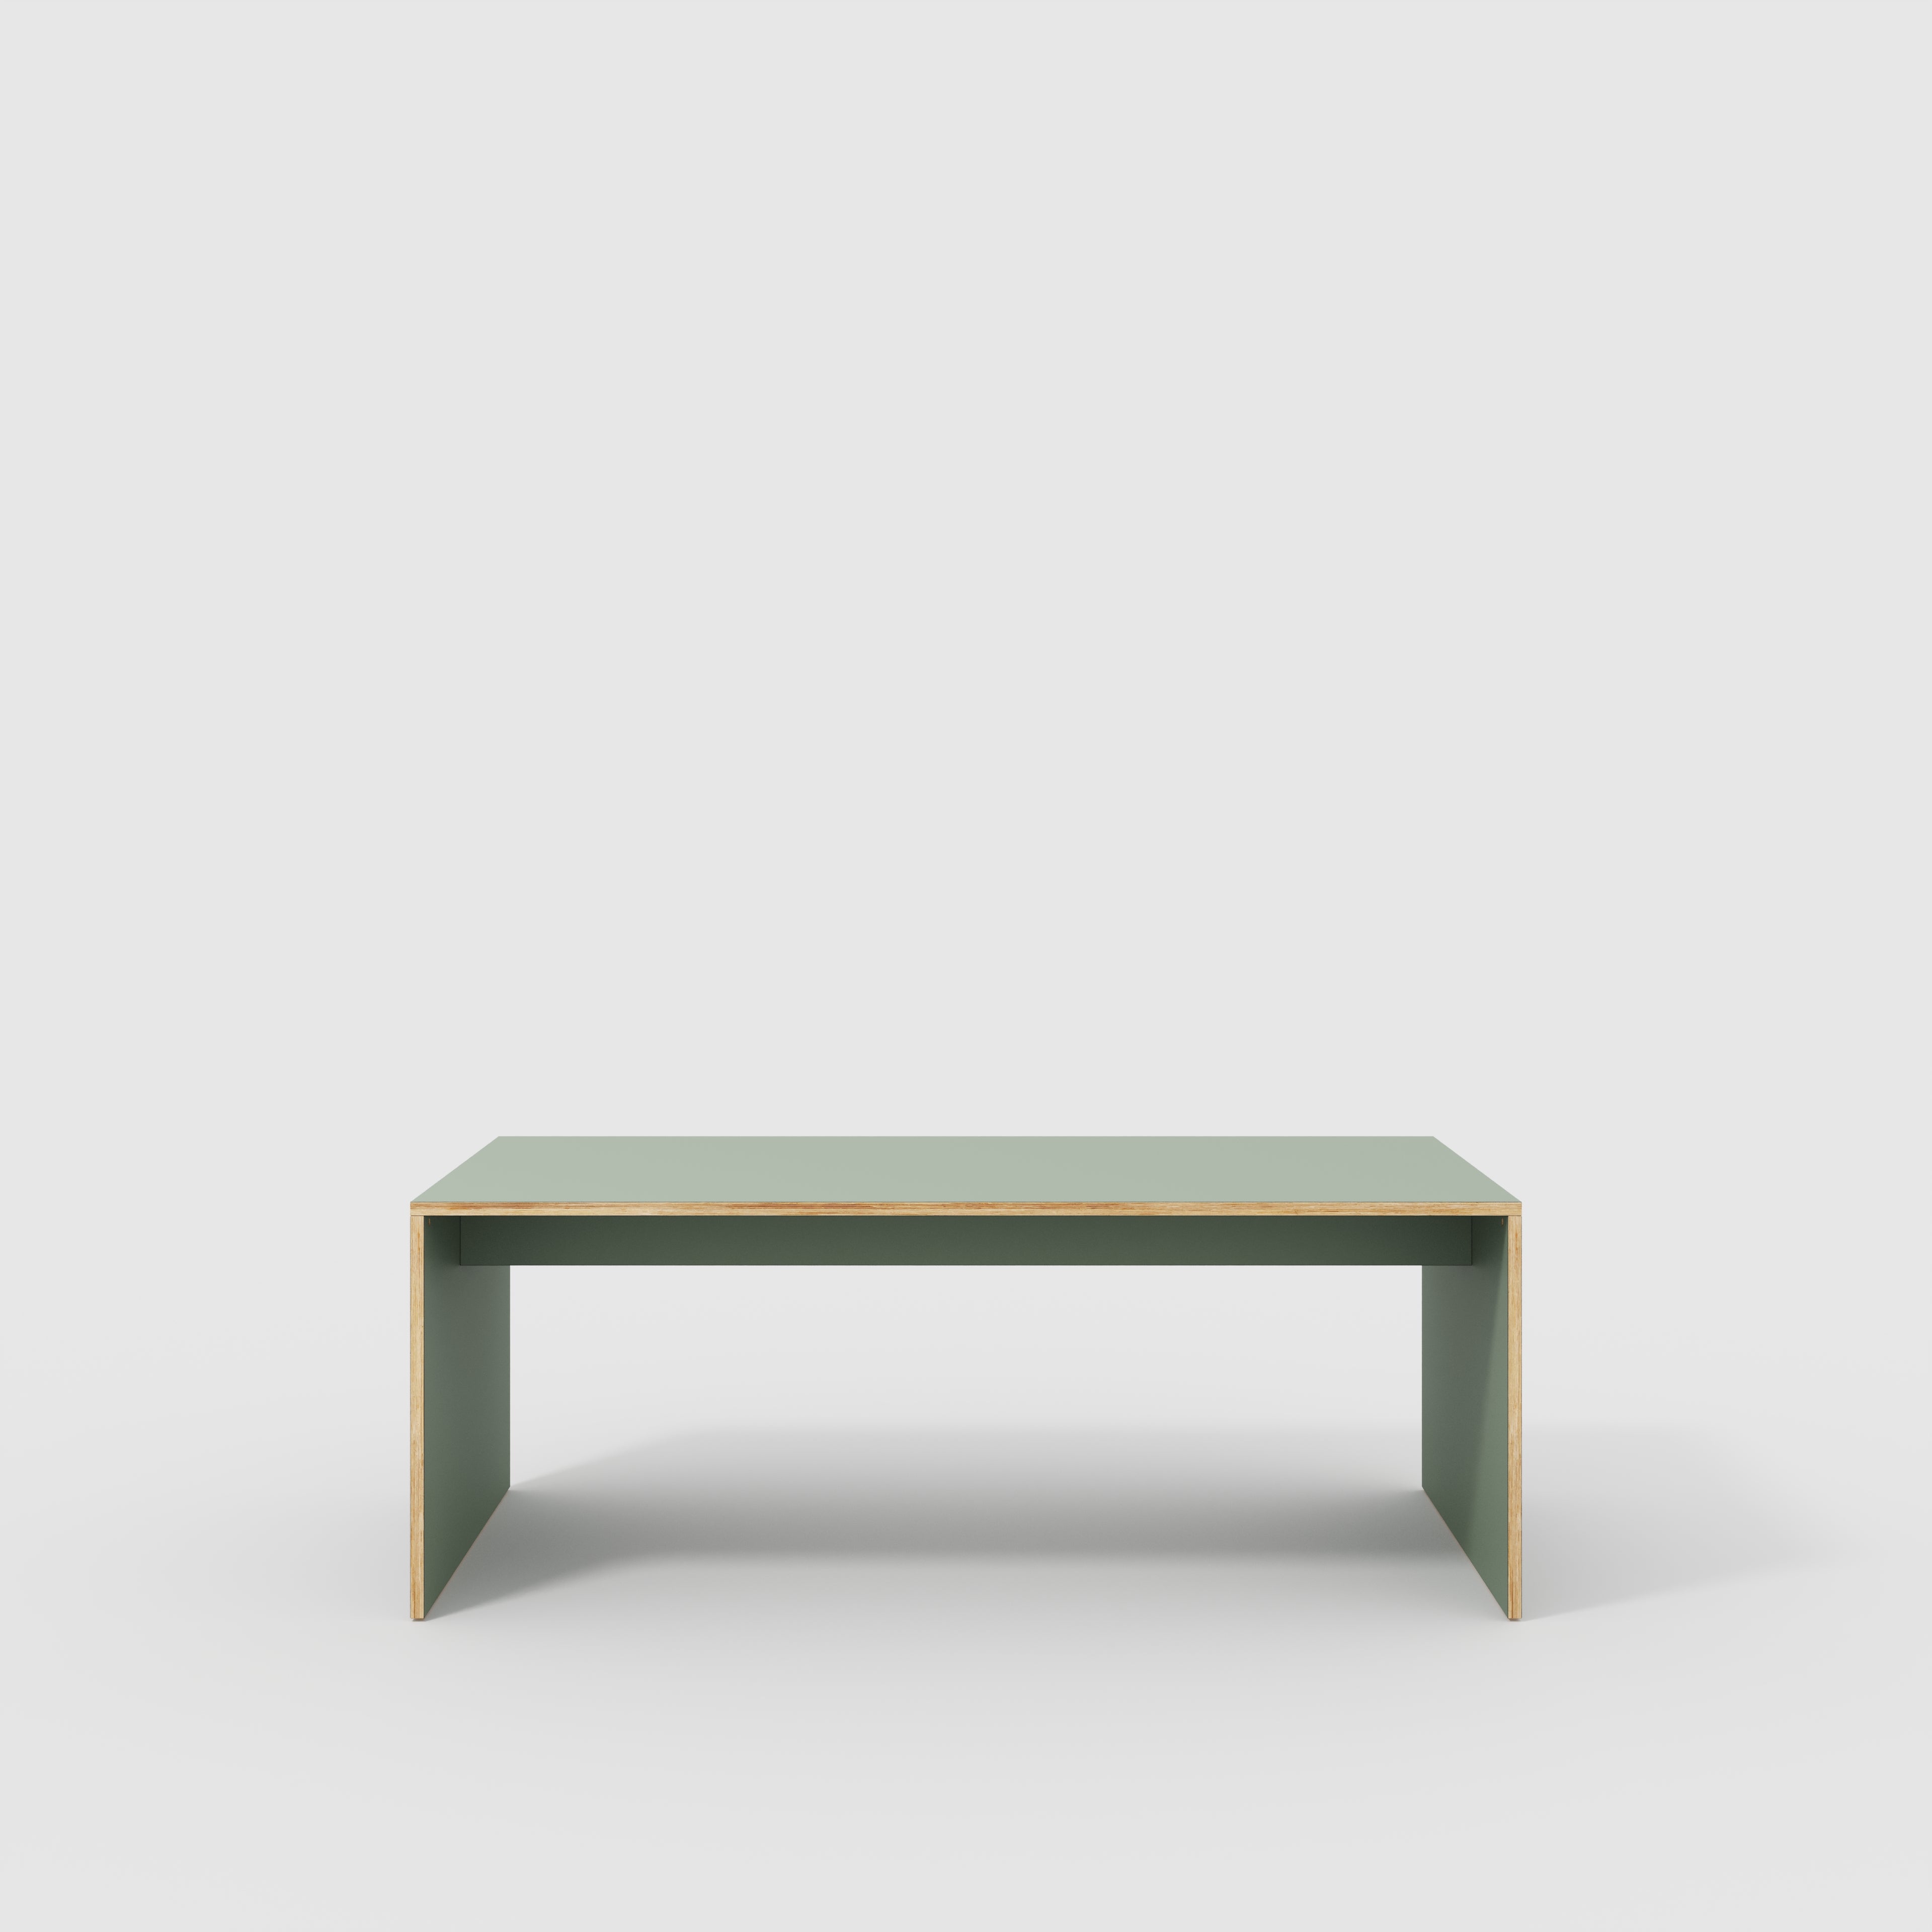 Table with Solid Sides - Formica Green Slate - 2000(w) x 1000(d) x 750(h)